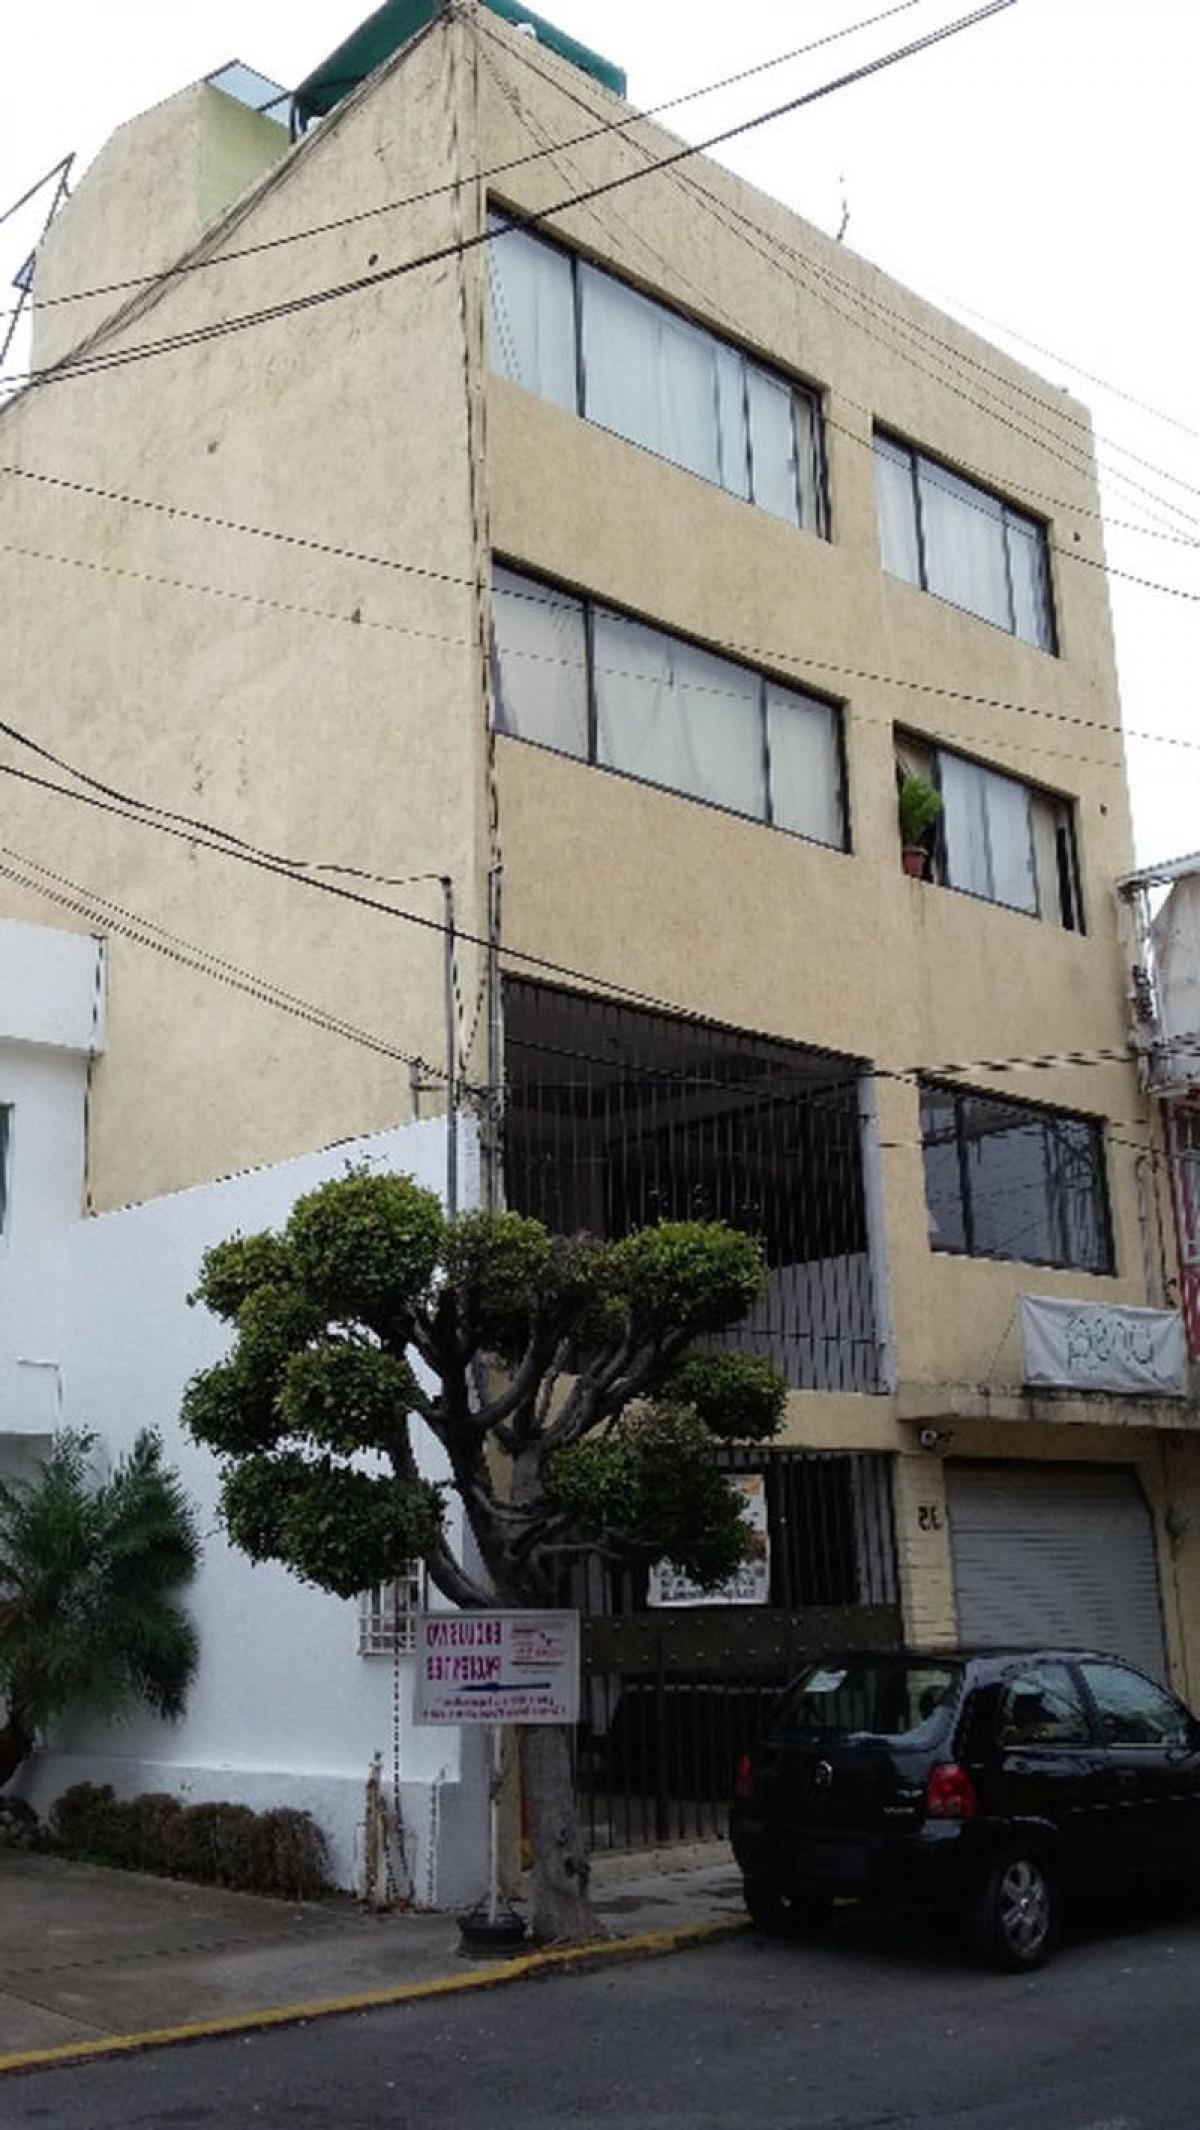 Picture of Apartment Building For Sale in Morelos, Morelos, Mexico